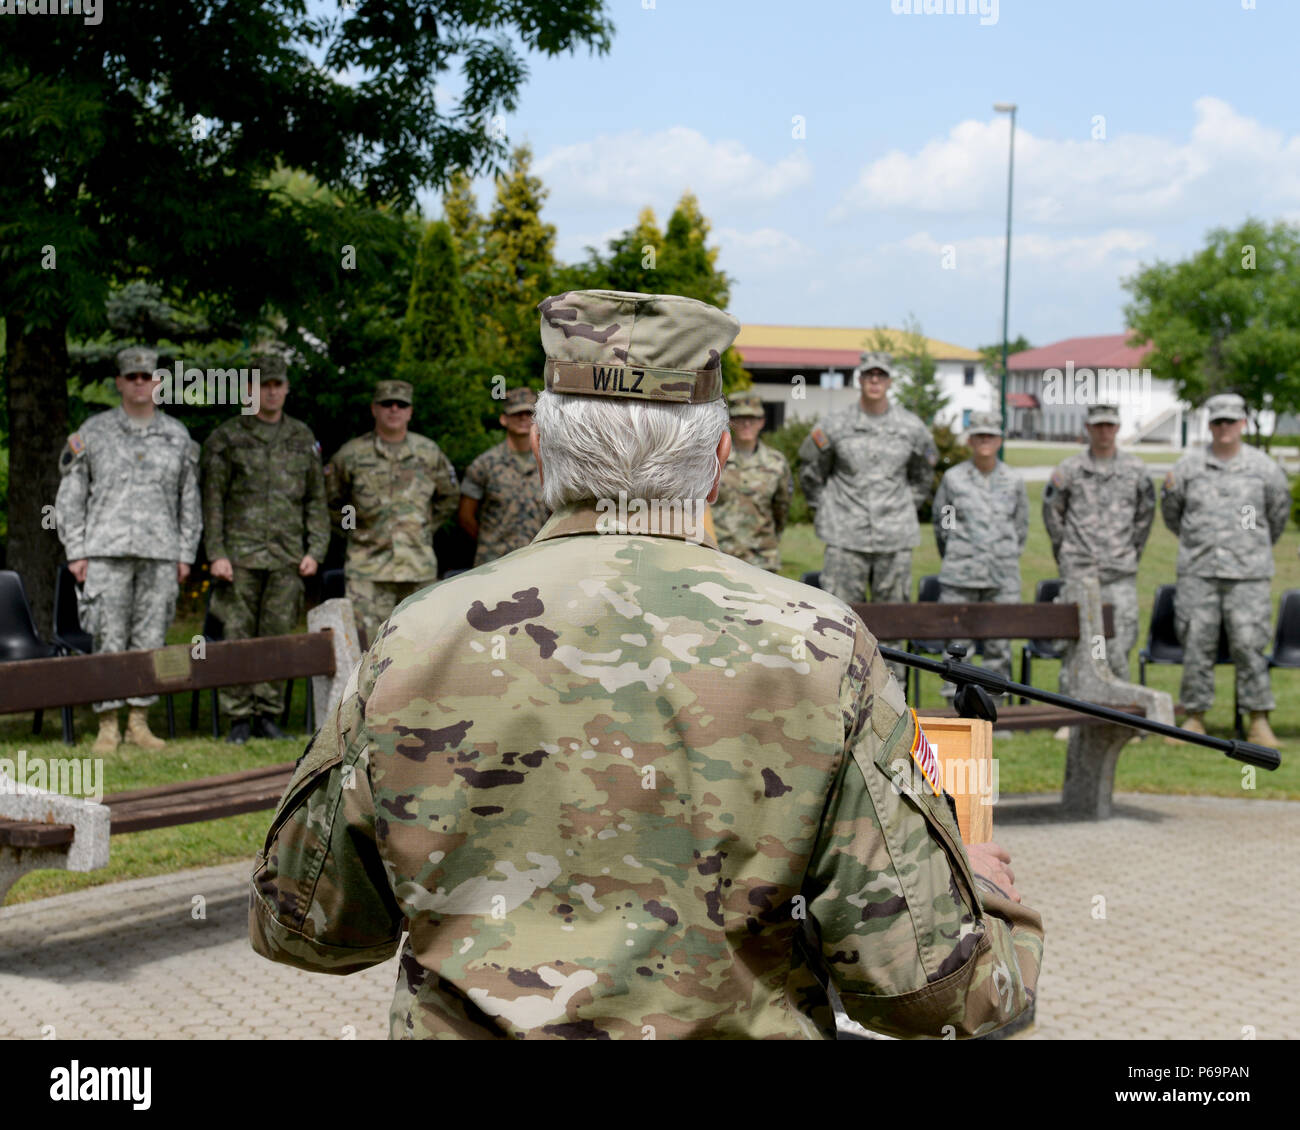 Brig. Gen. Giselle Wilz, NATO Headquarters Sa commander, gives a speech to honor those who paid the ultimate sacrifice for freedom during a Memorial Day Ceremony at Camp Butmir in Sarajevo, Bosnia and Herzegovina, May 30, 2016. Stock Photo